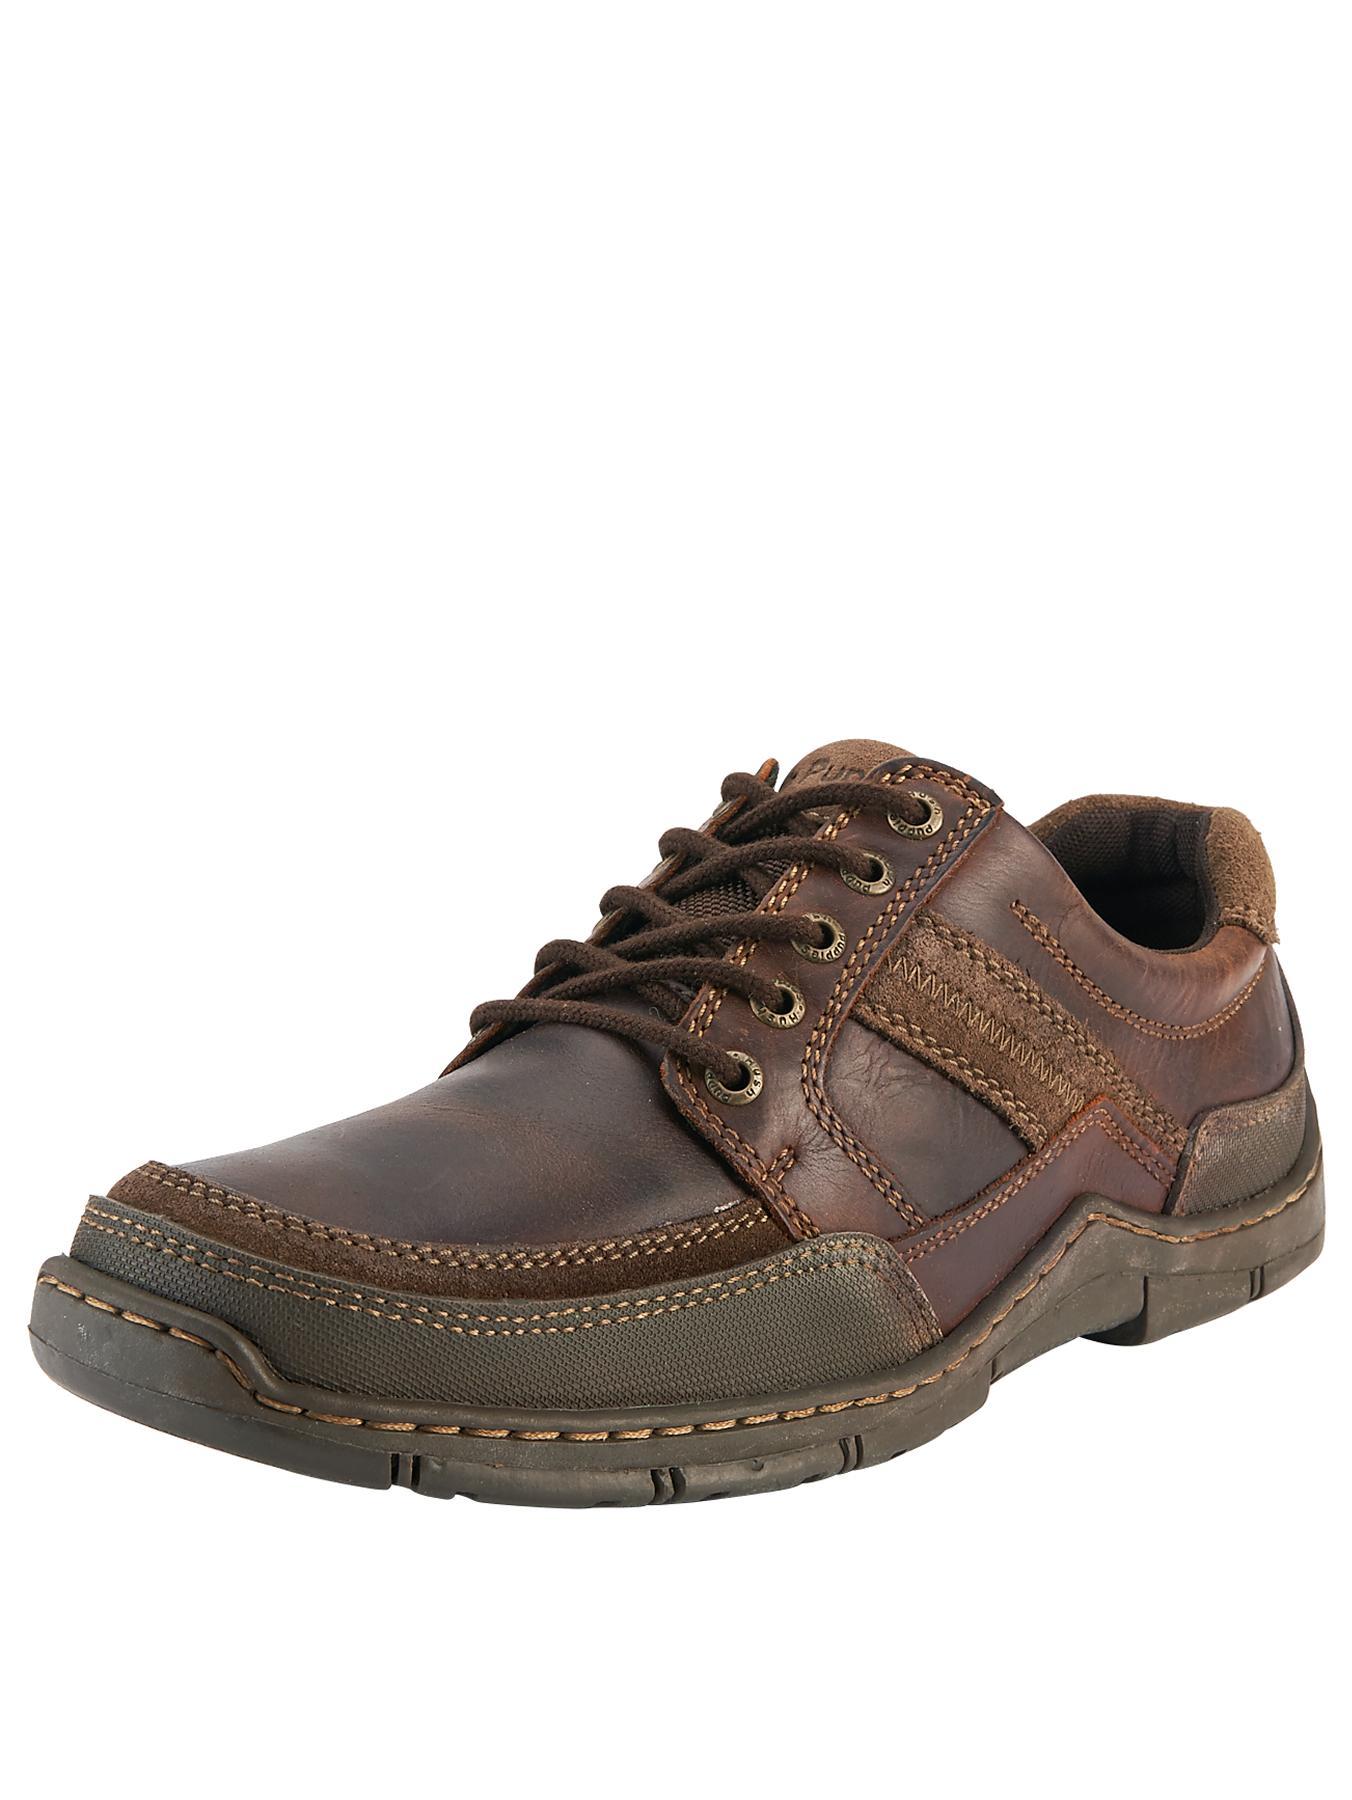 Jet Stream Mens Casual Shoes brown Hush Puppies Jet Stream Casual Mens ...